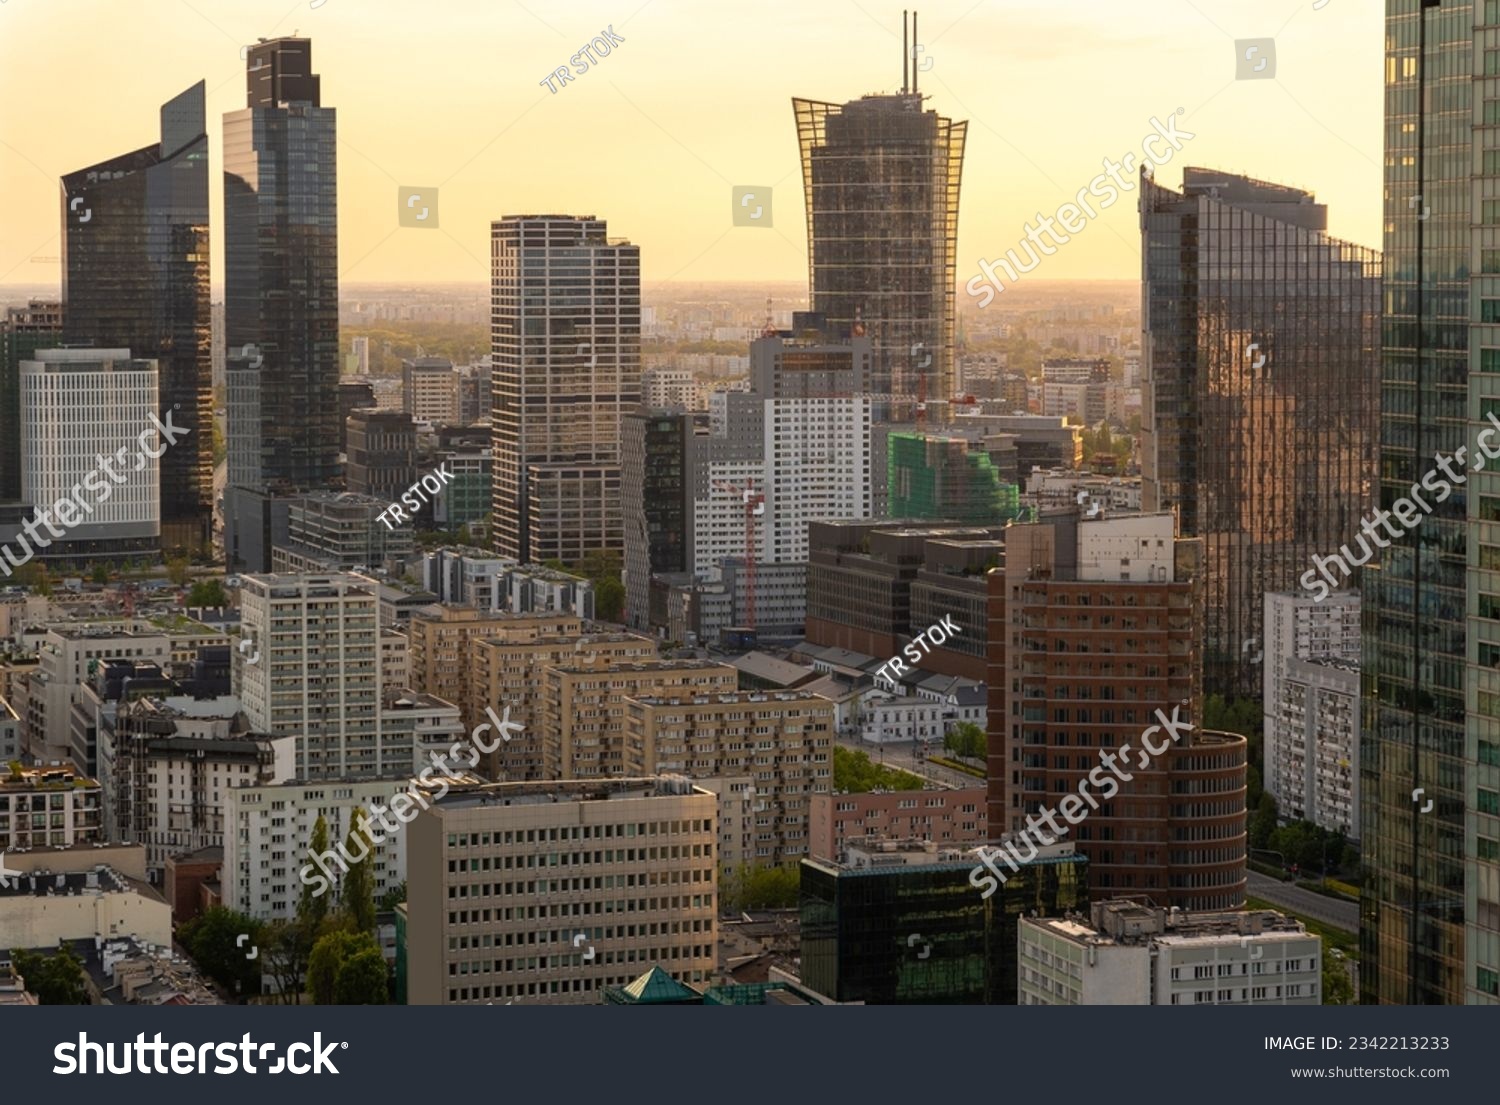 Panoramic view of modern skyscrapers and business centers in Warsaw. View of the city center from above. Warsaw, Poland. #2342213233